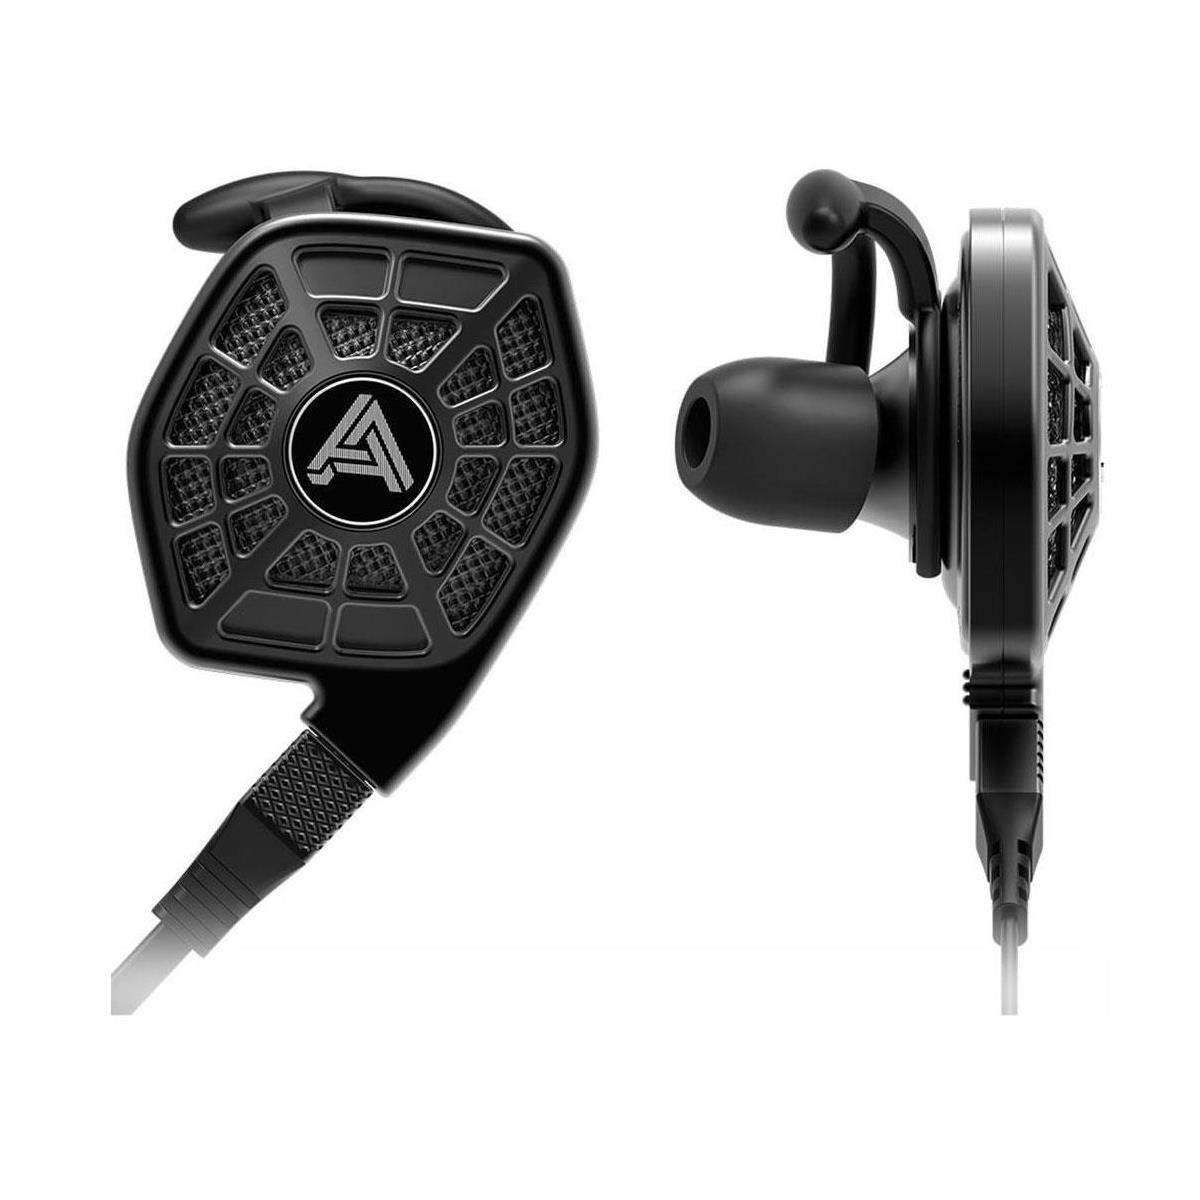 Image of AUDEZE LCDi4 In-Ears Headphones with Premium Braided Cable